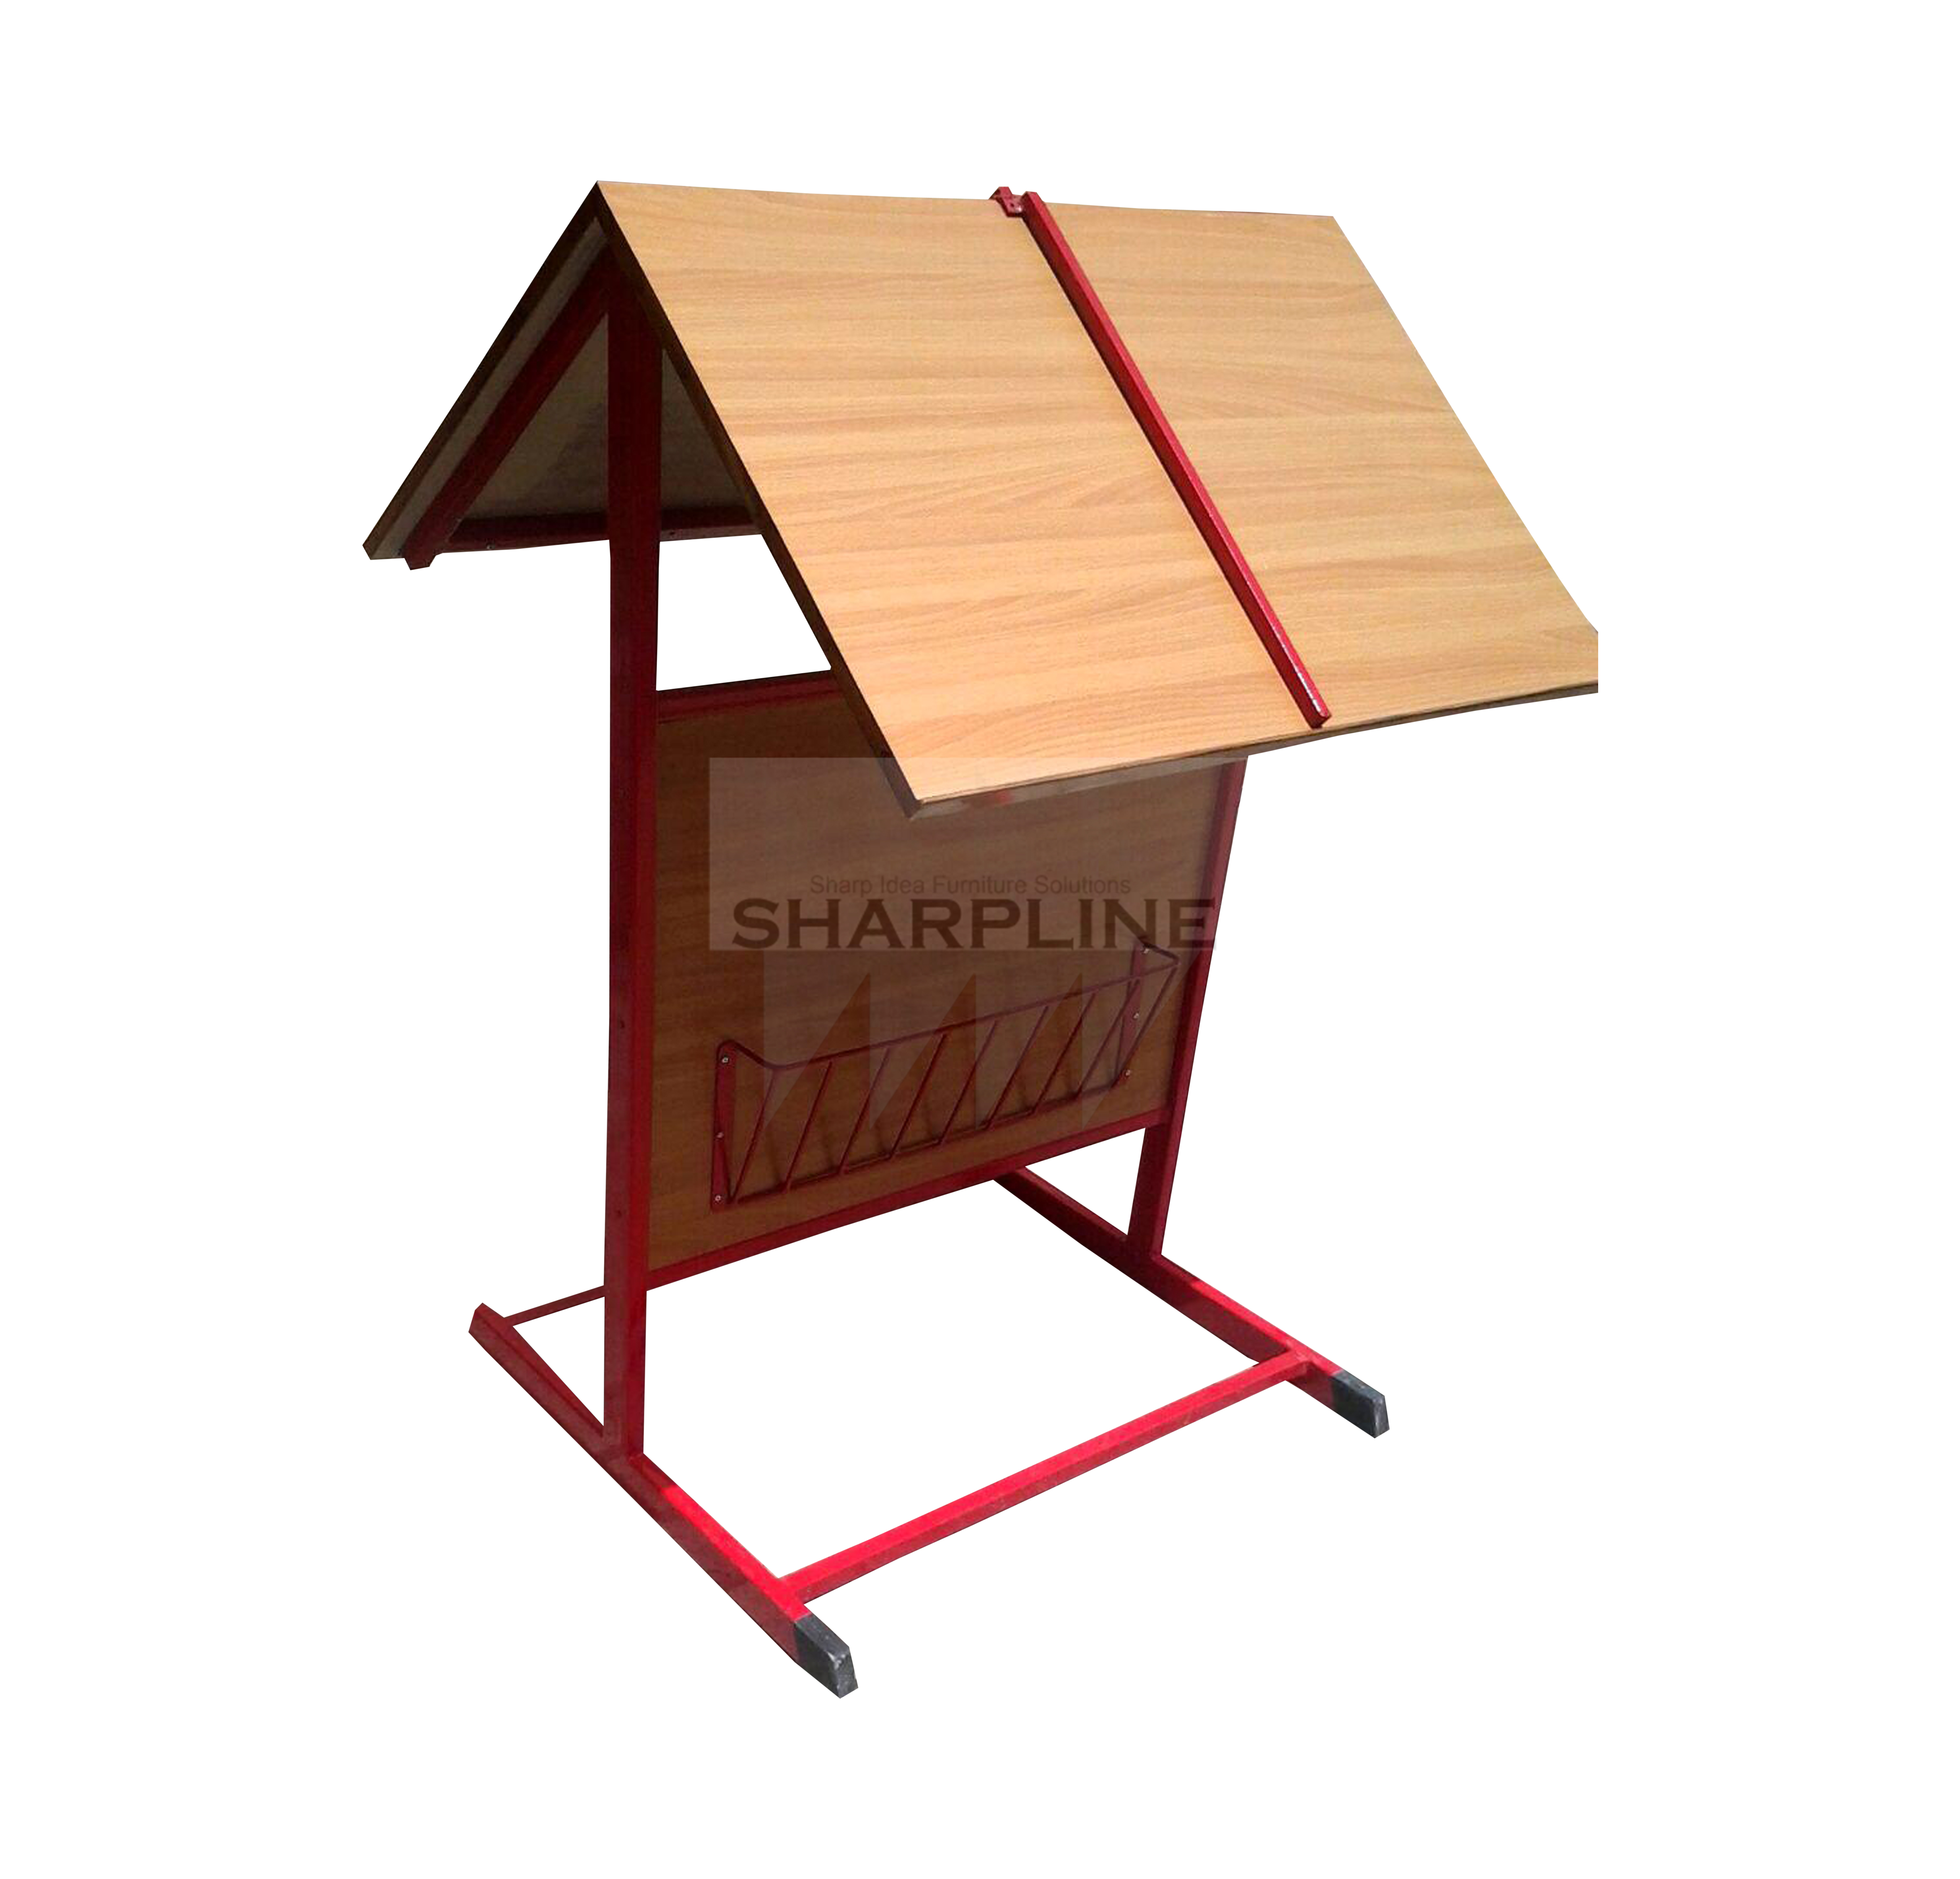 Newspaper & Lecture Stands